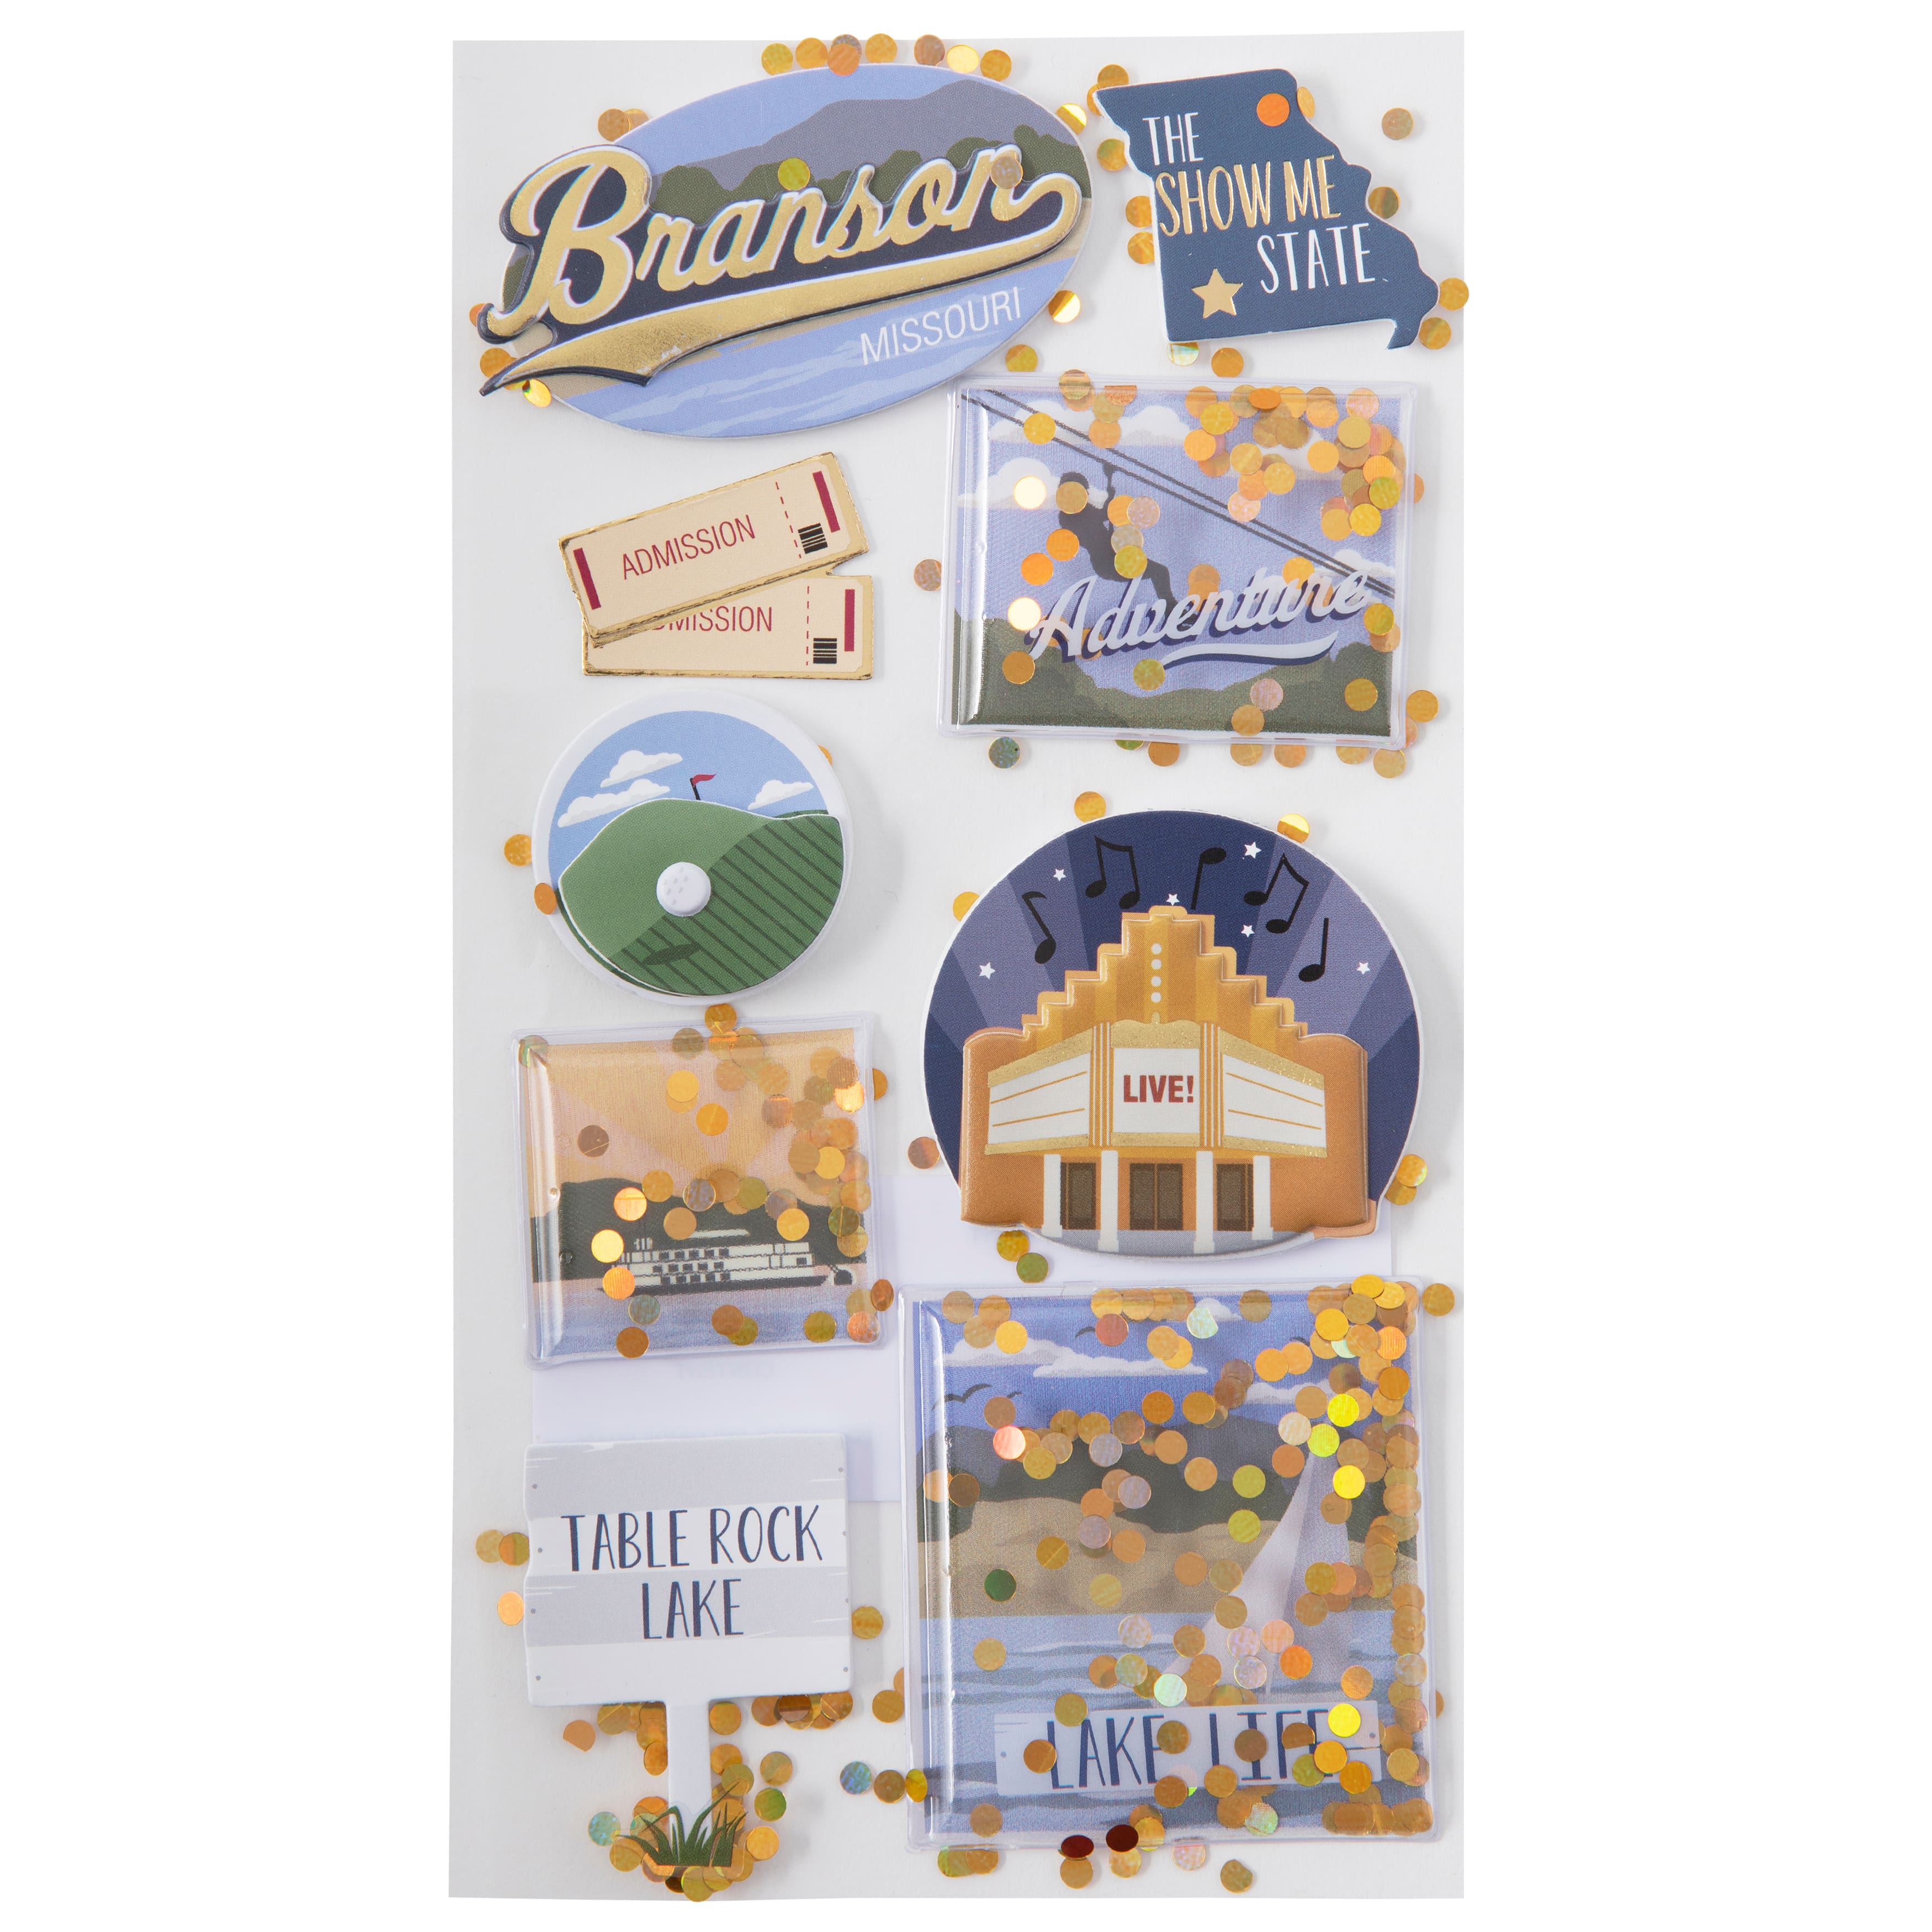 Branson Dimensional Stickers by Recollections&#x2122;